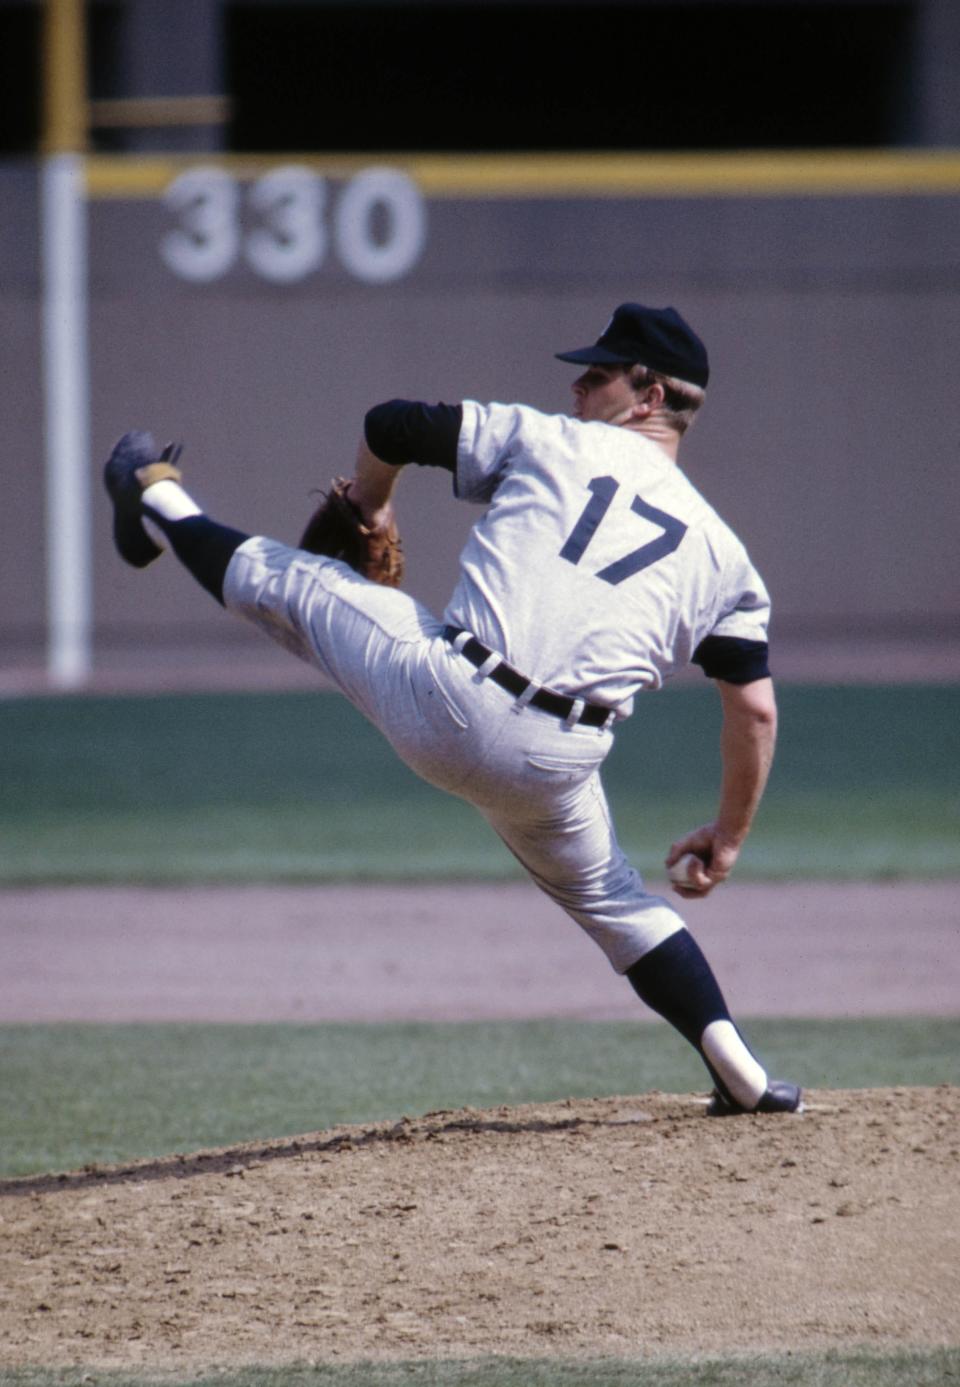 Oct 1968; St. Louis, MO, USA; FILE PHOTO; Detroit Tigers pitcher Denny McLain (17) delivers a pitch in the 1968 World Series against the St. Louis Cardinals at Busch Stadium. The Tigers won the series 4-3. Mandatory Credit: Malcolm Emmons-USA TODAY Sports